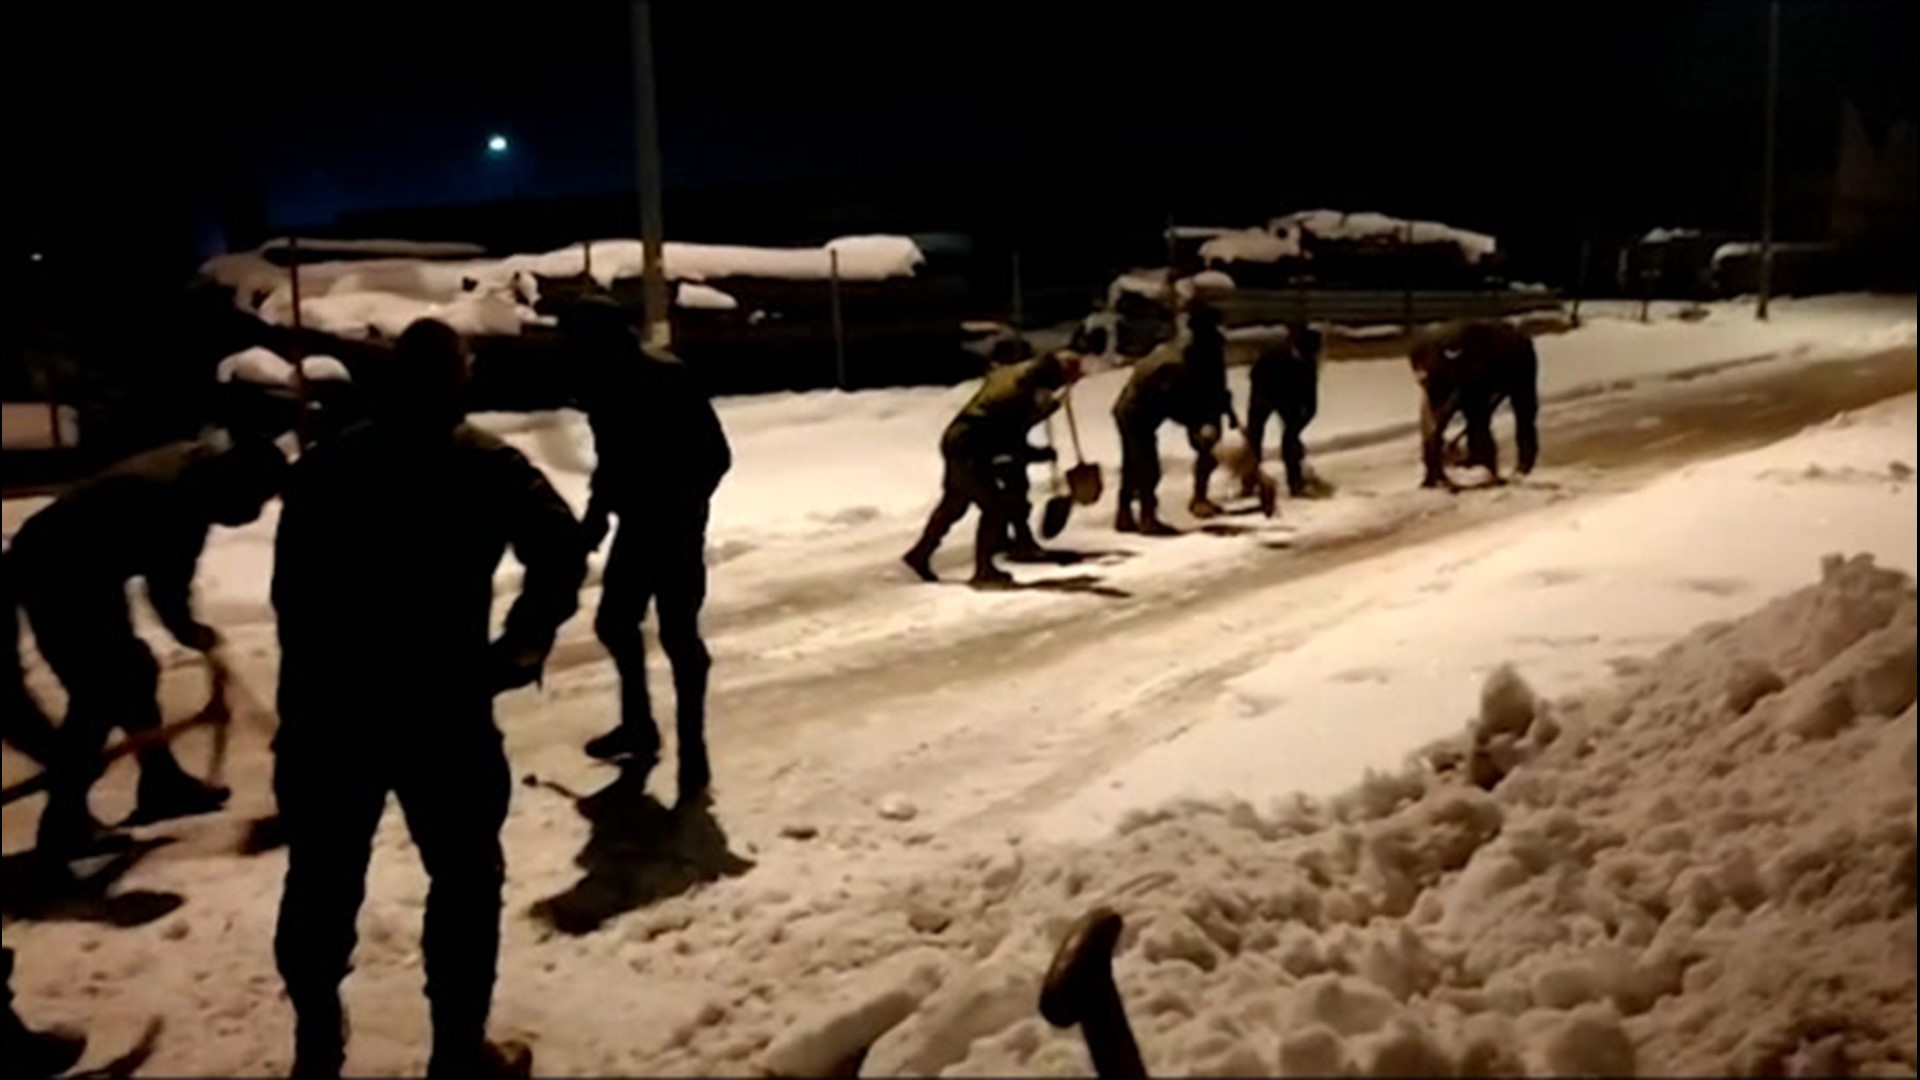 In the village of Valdemorillo, Spain, 40 kilometers from Madrid, the Spanish military continues to clear snow from roadways on Jan. 15. The region was blanketed with snow by storm Filomena, the worst in decades.